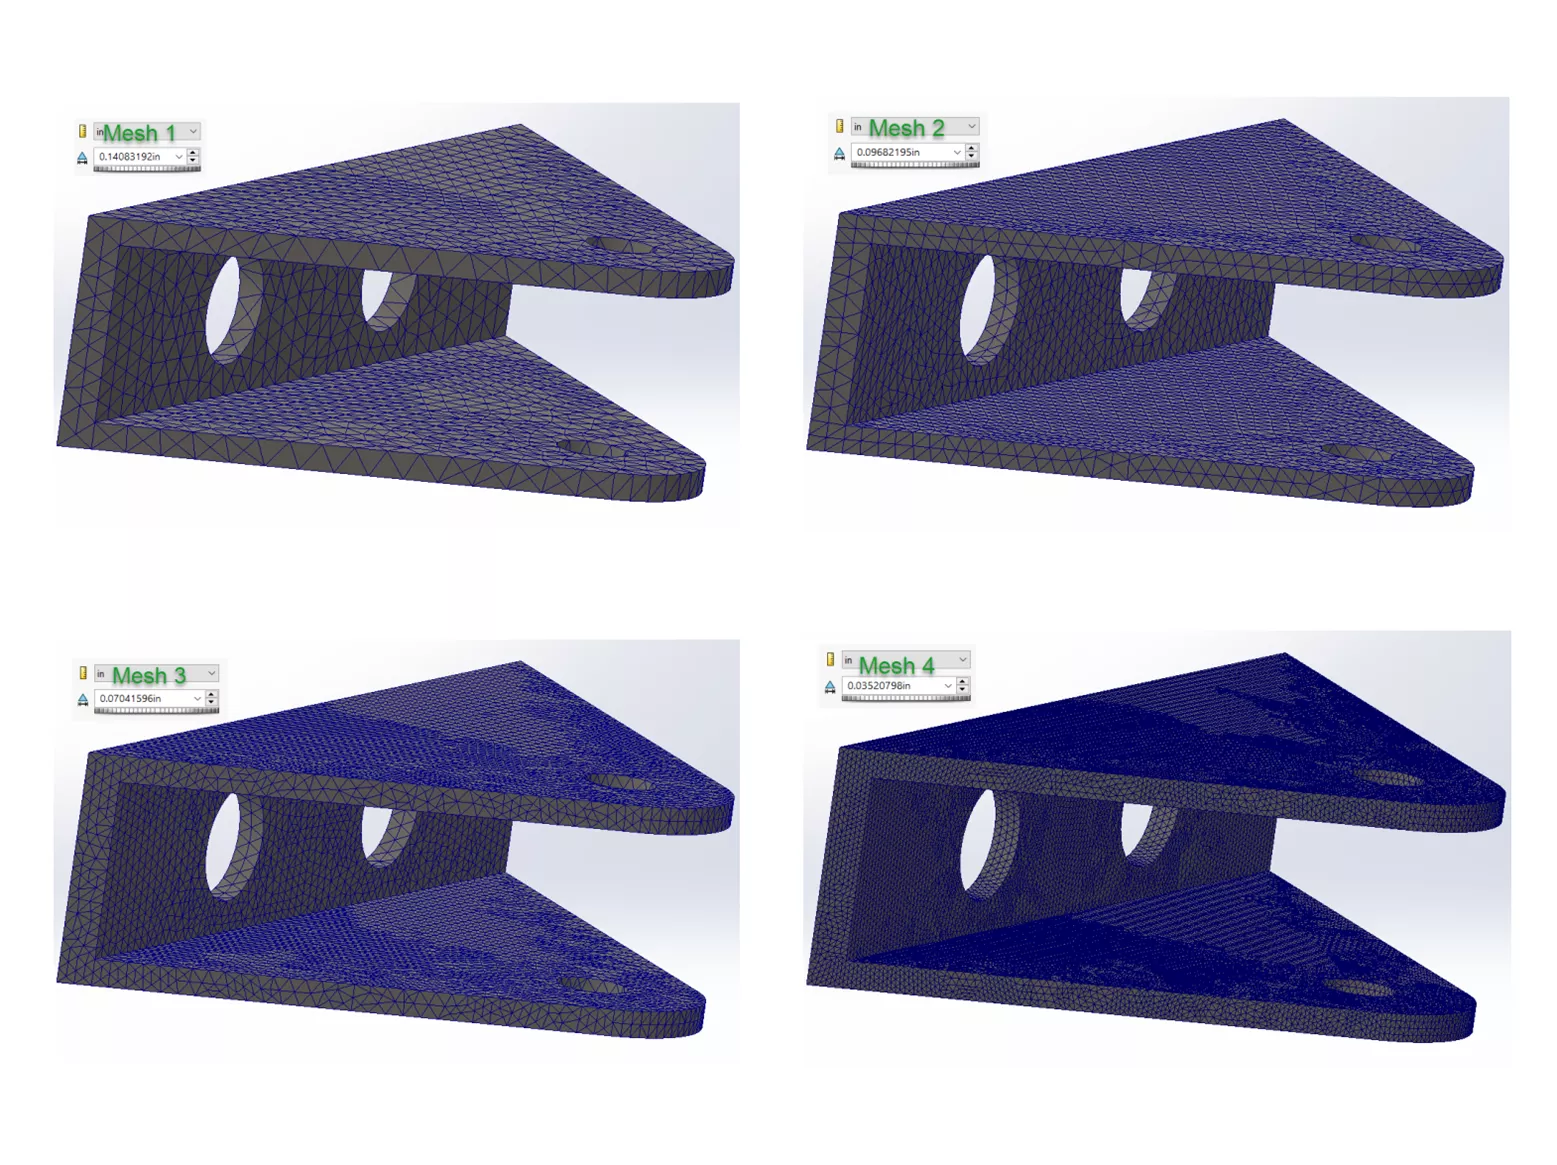 Different Mesh Densities in Four SOLIDWORKS Simulation Studies